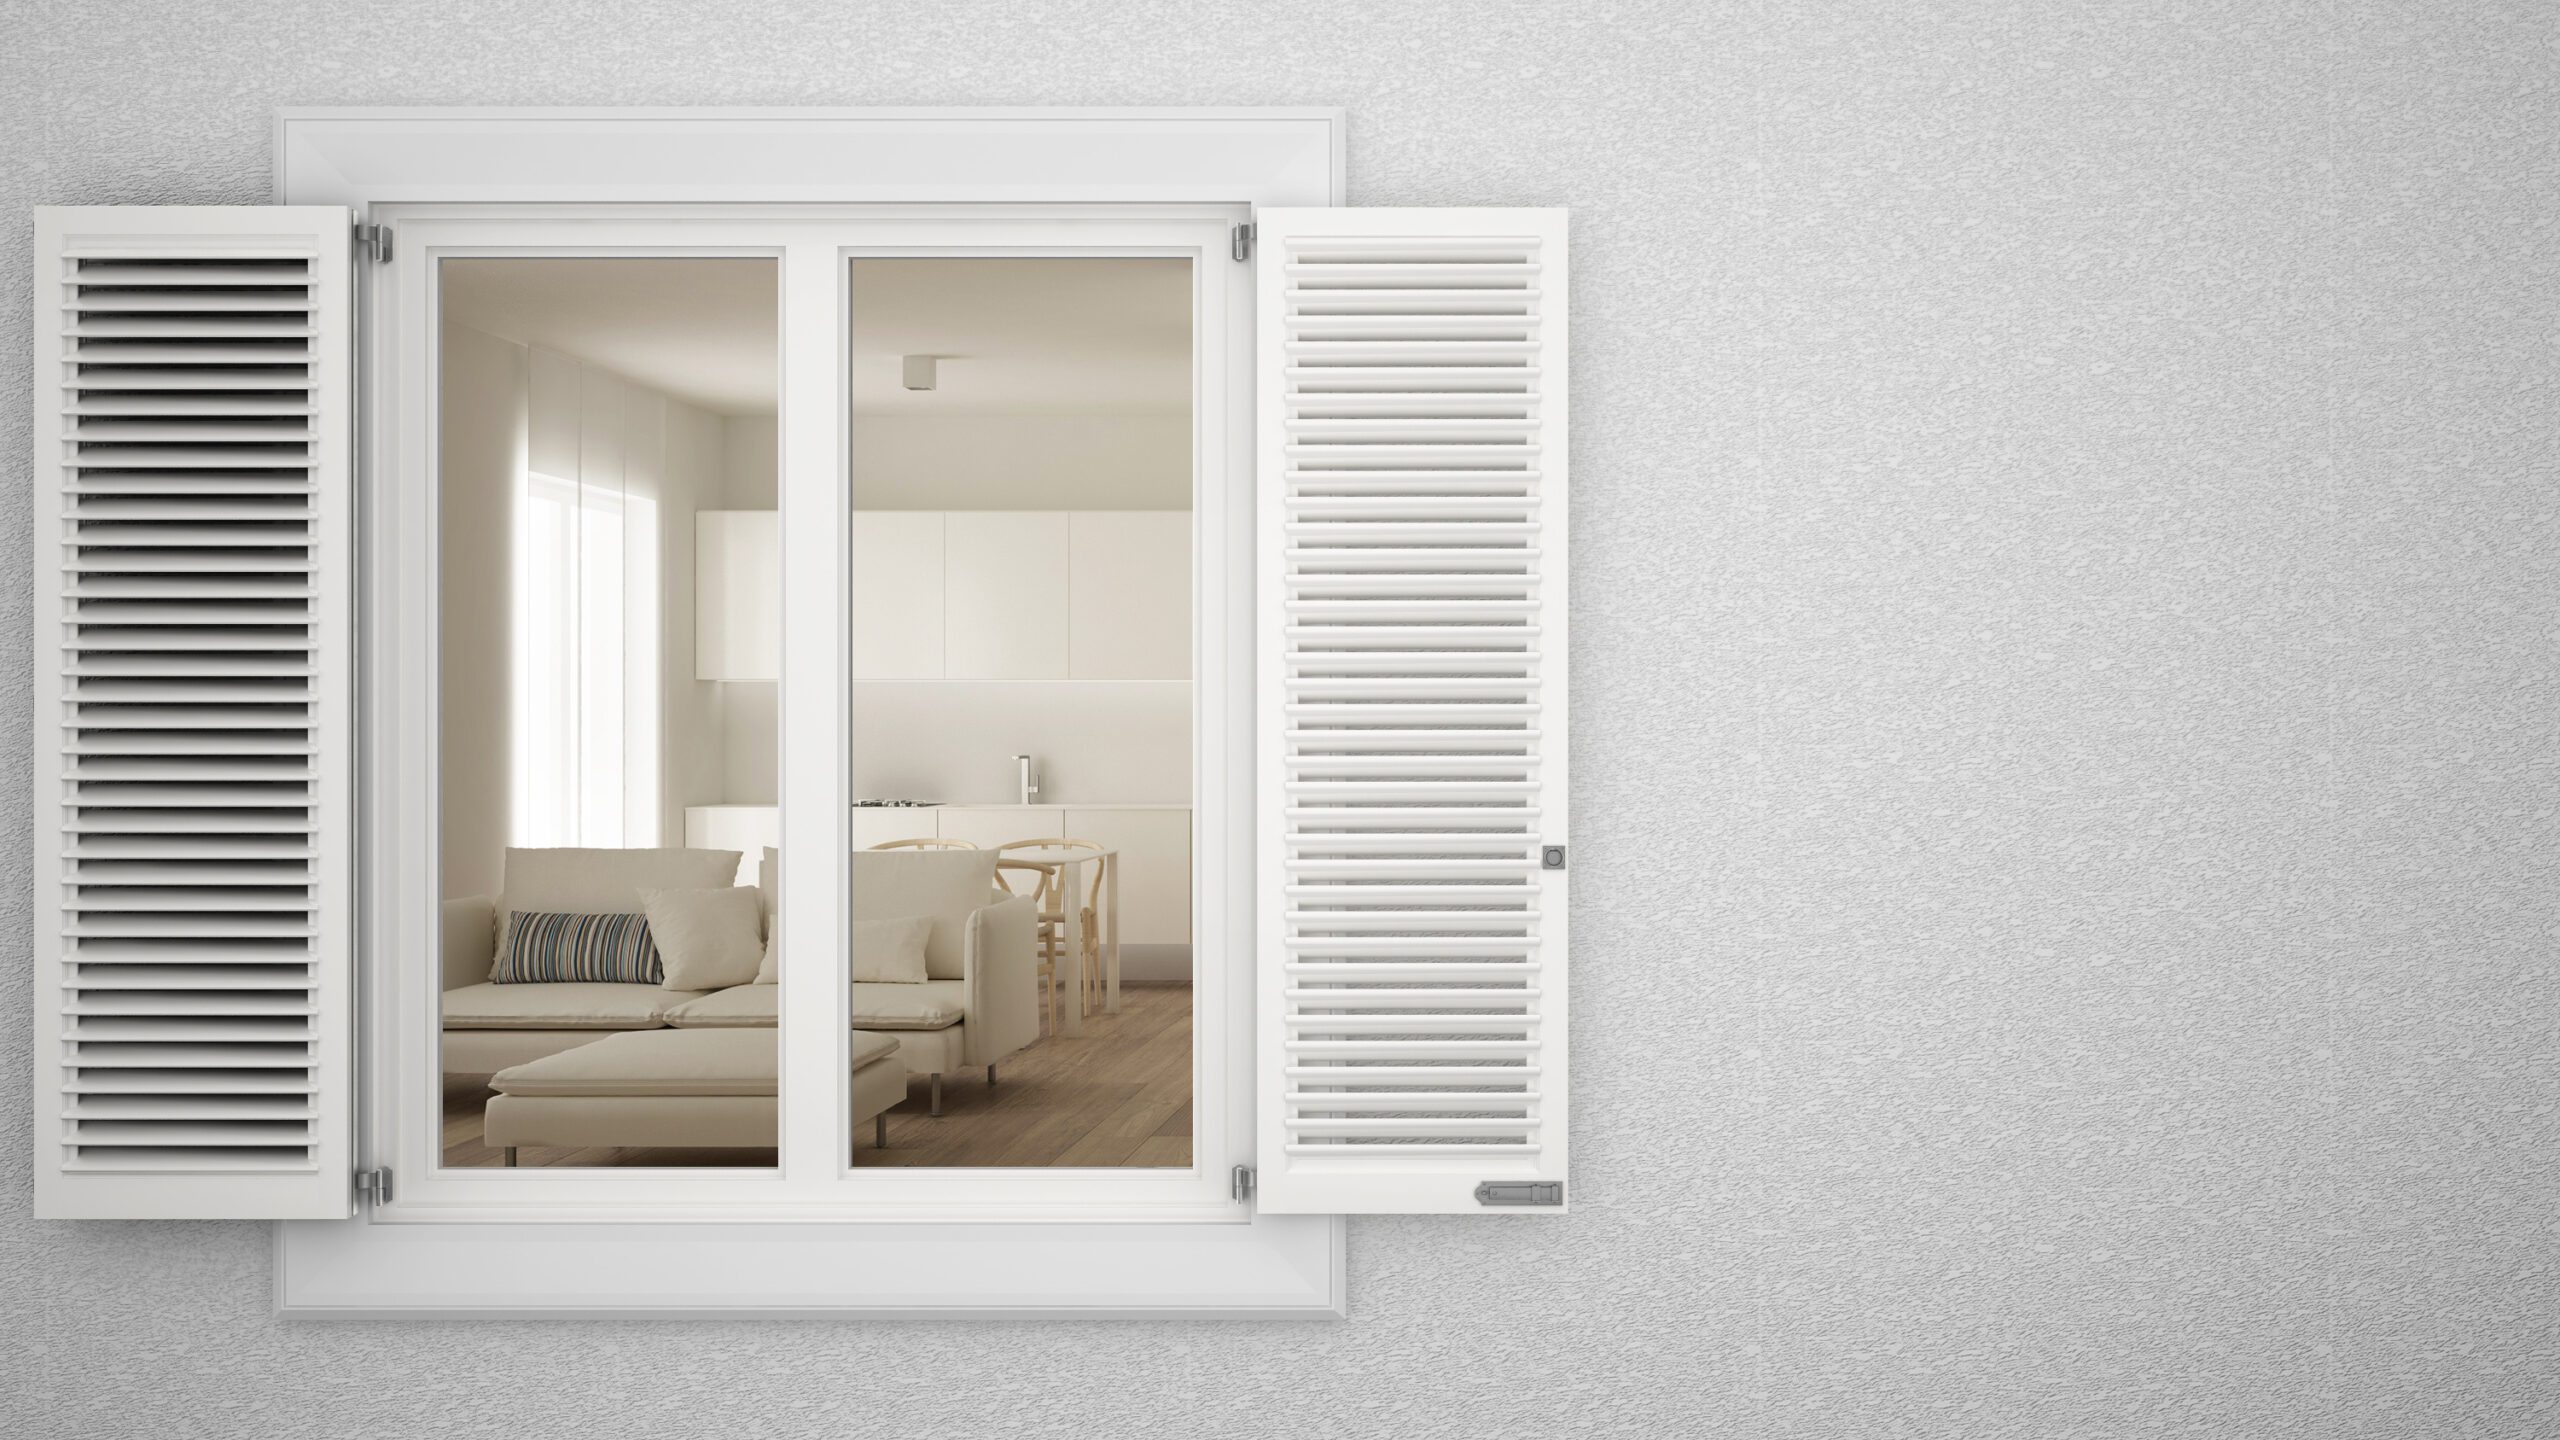 Window with shutters on outside of plaster wall